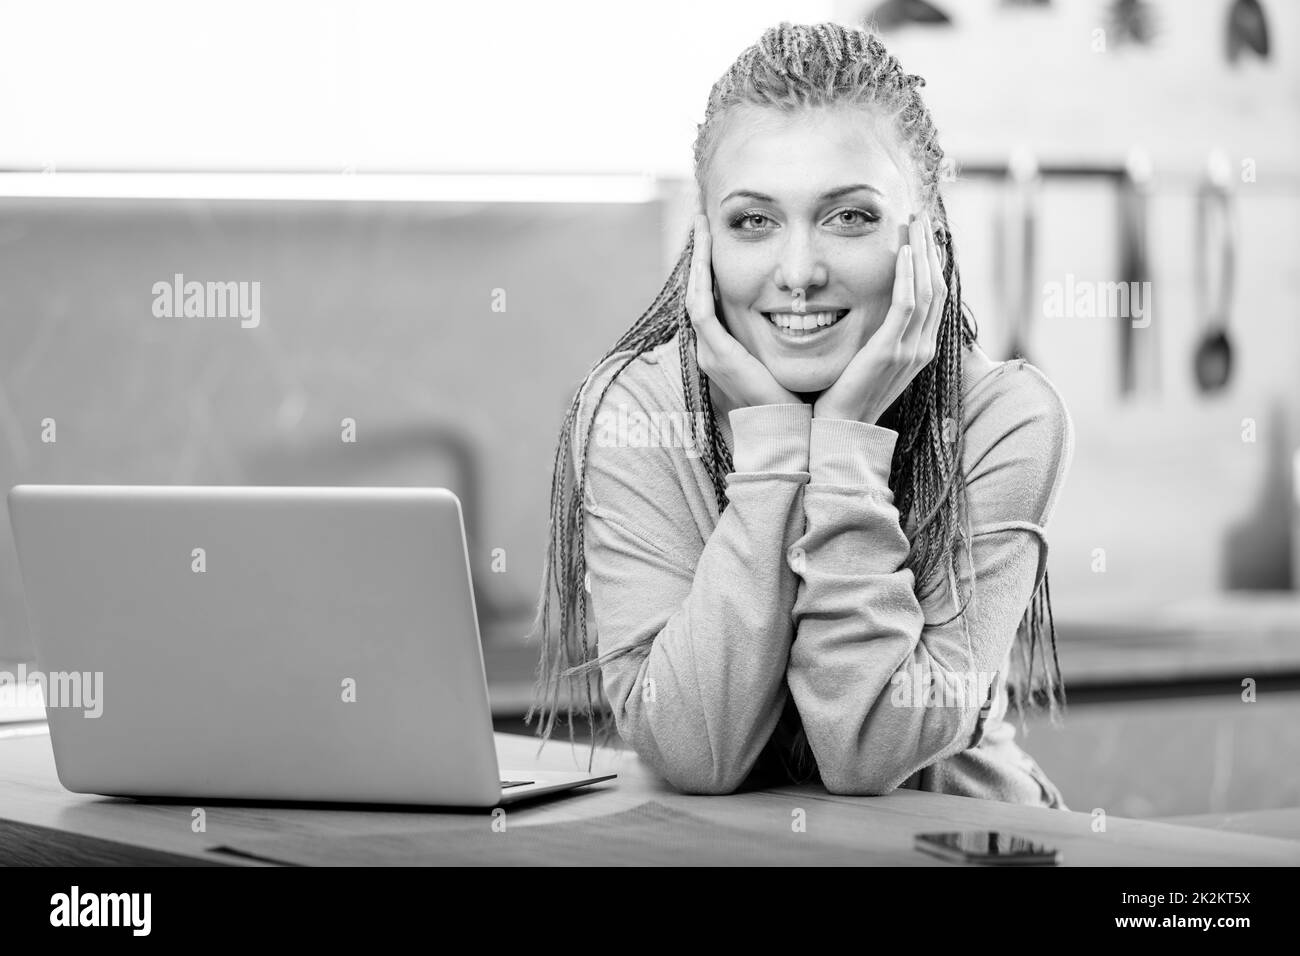 Young smiling woman sitting next to computer Stock Photo